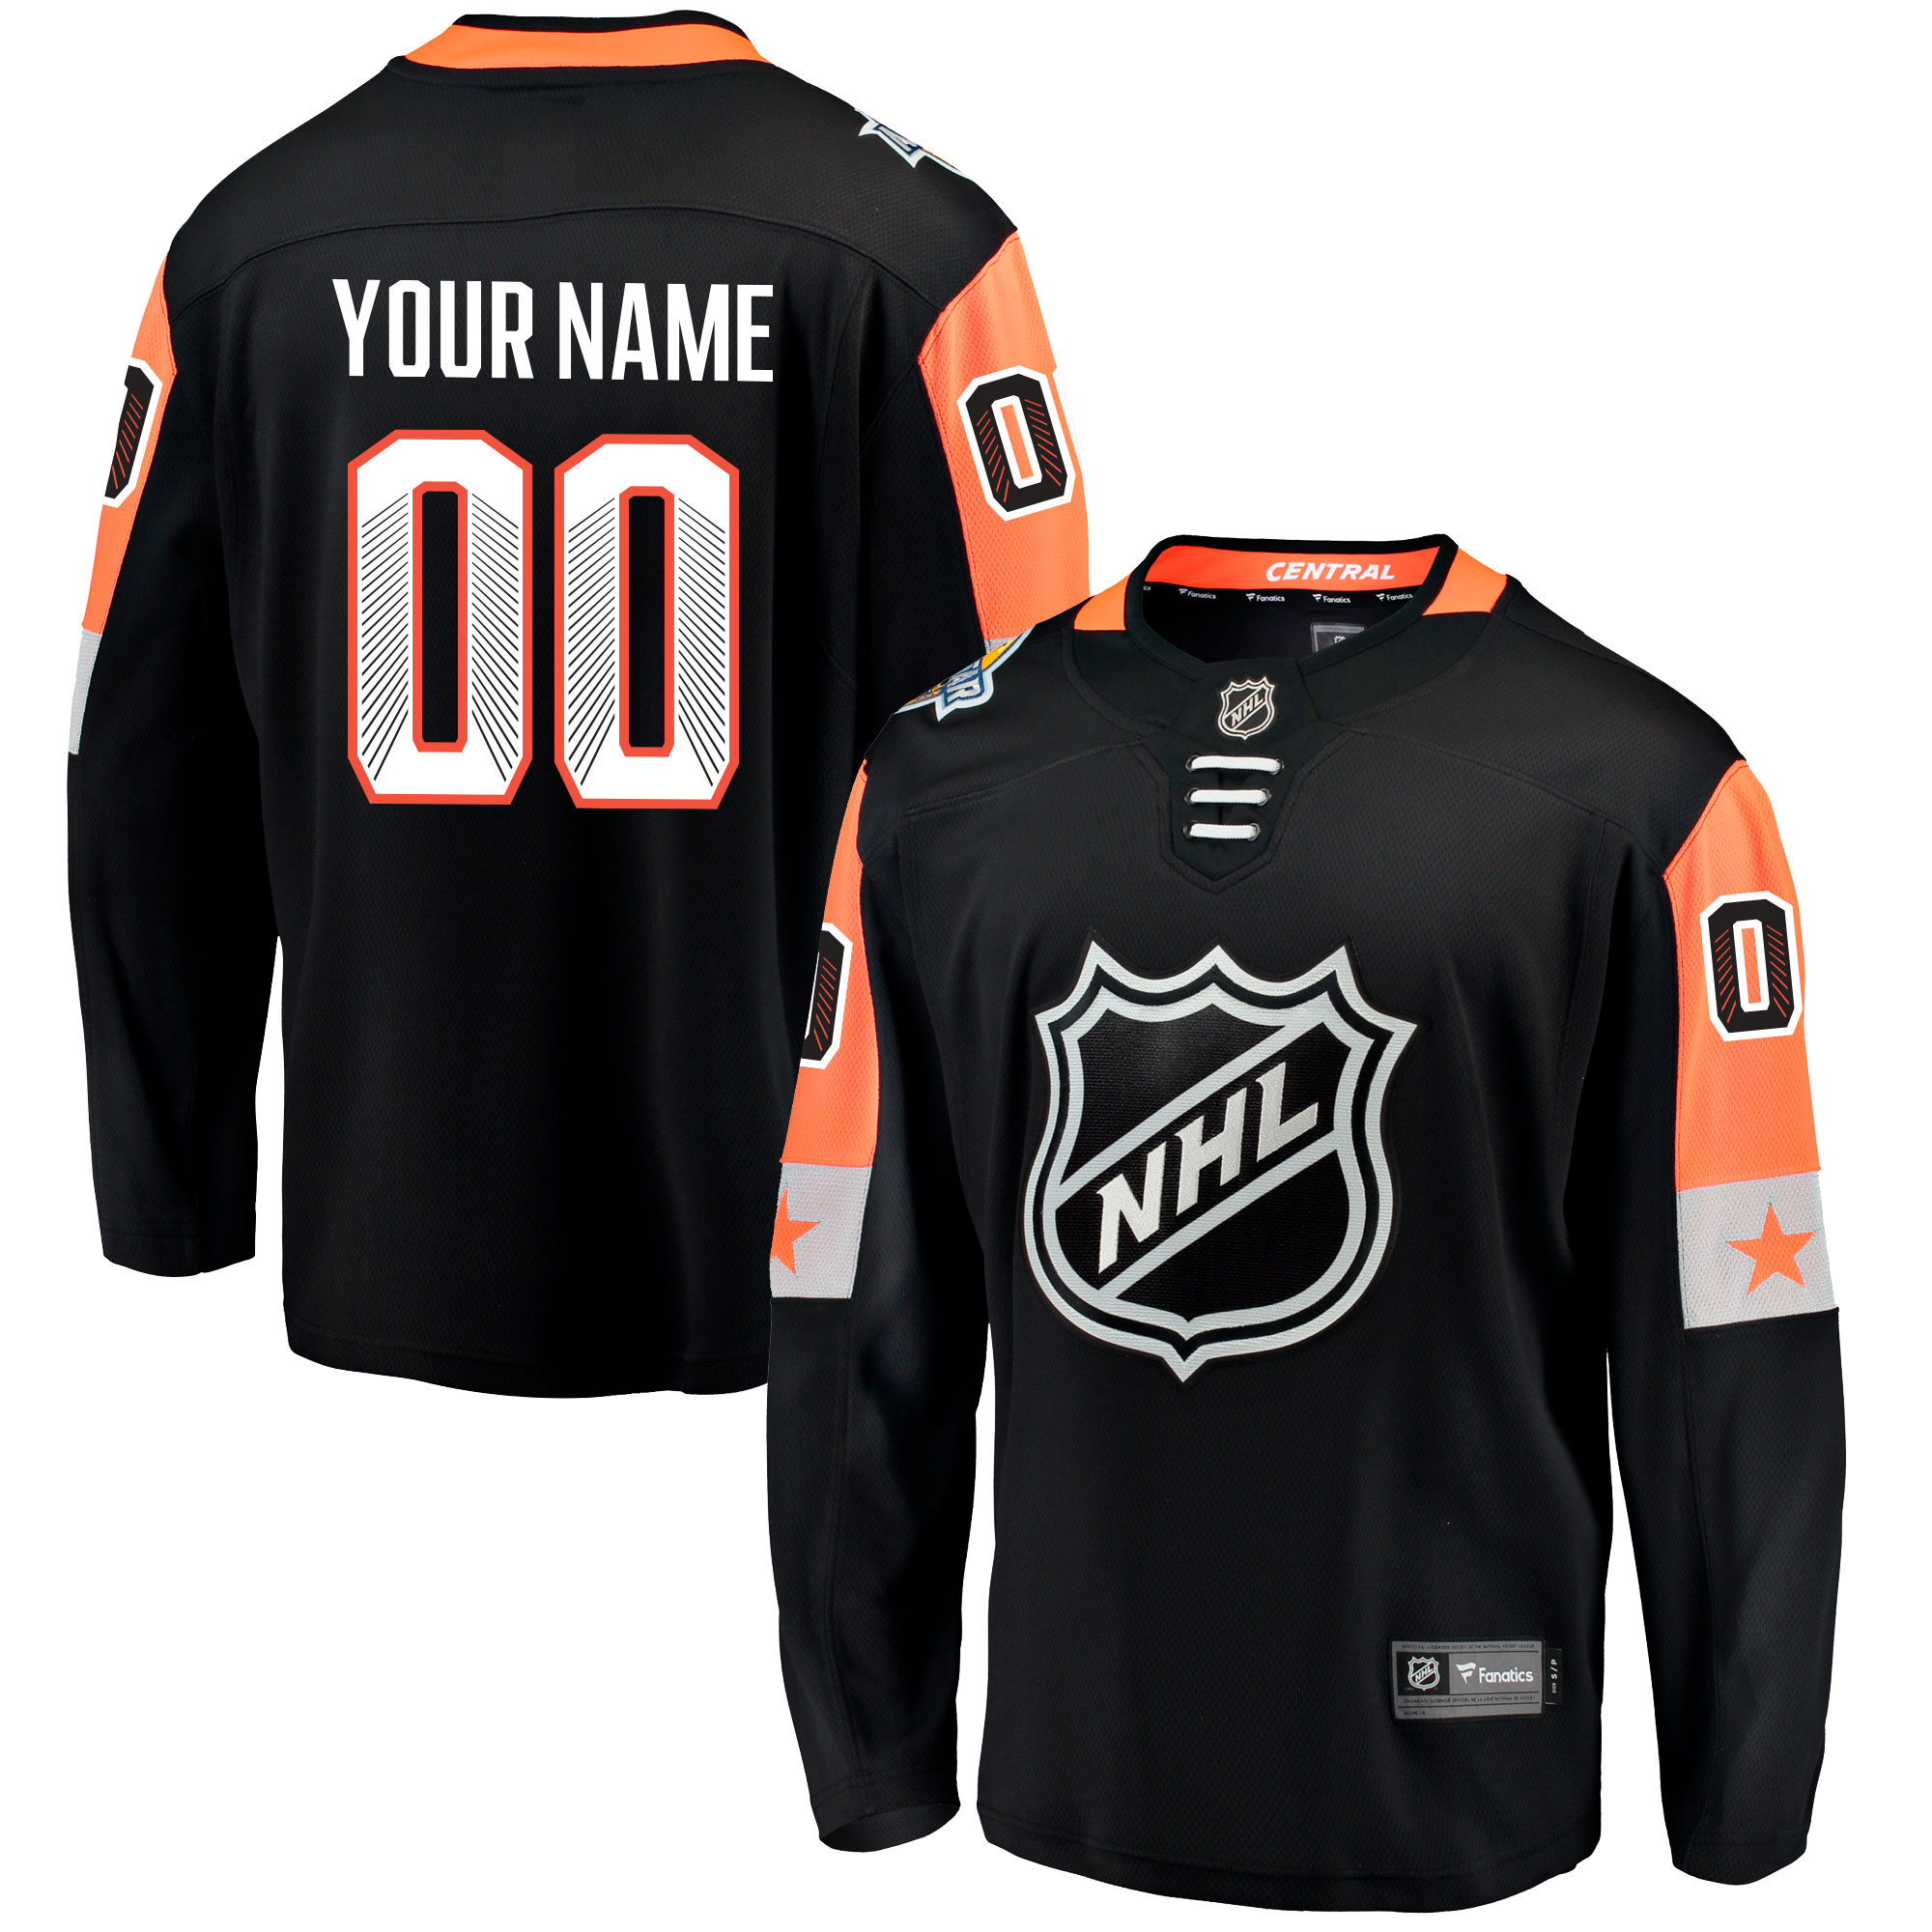 Mens NHL Central Division All Star Fanatics Branded Breakaway Jersey Customised->new orleans saints->NFL Jersey